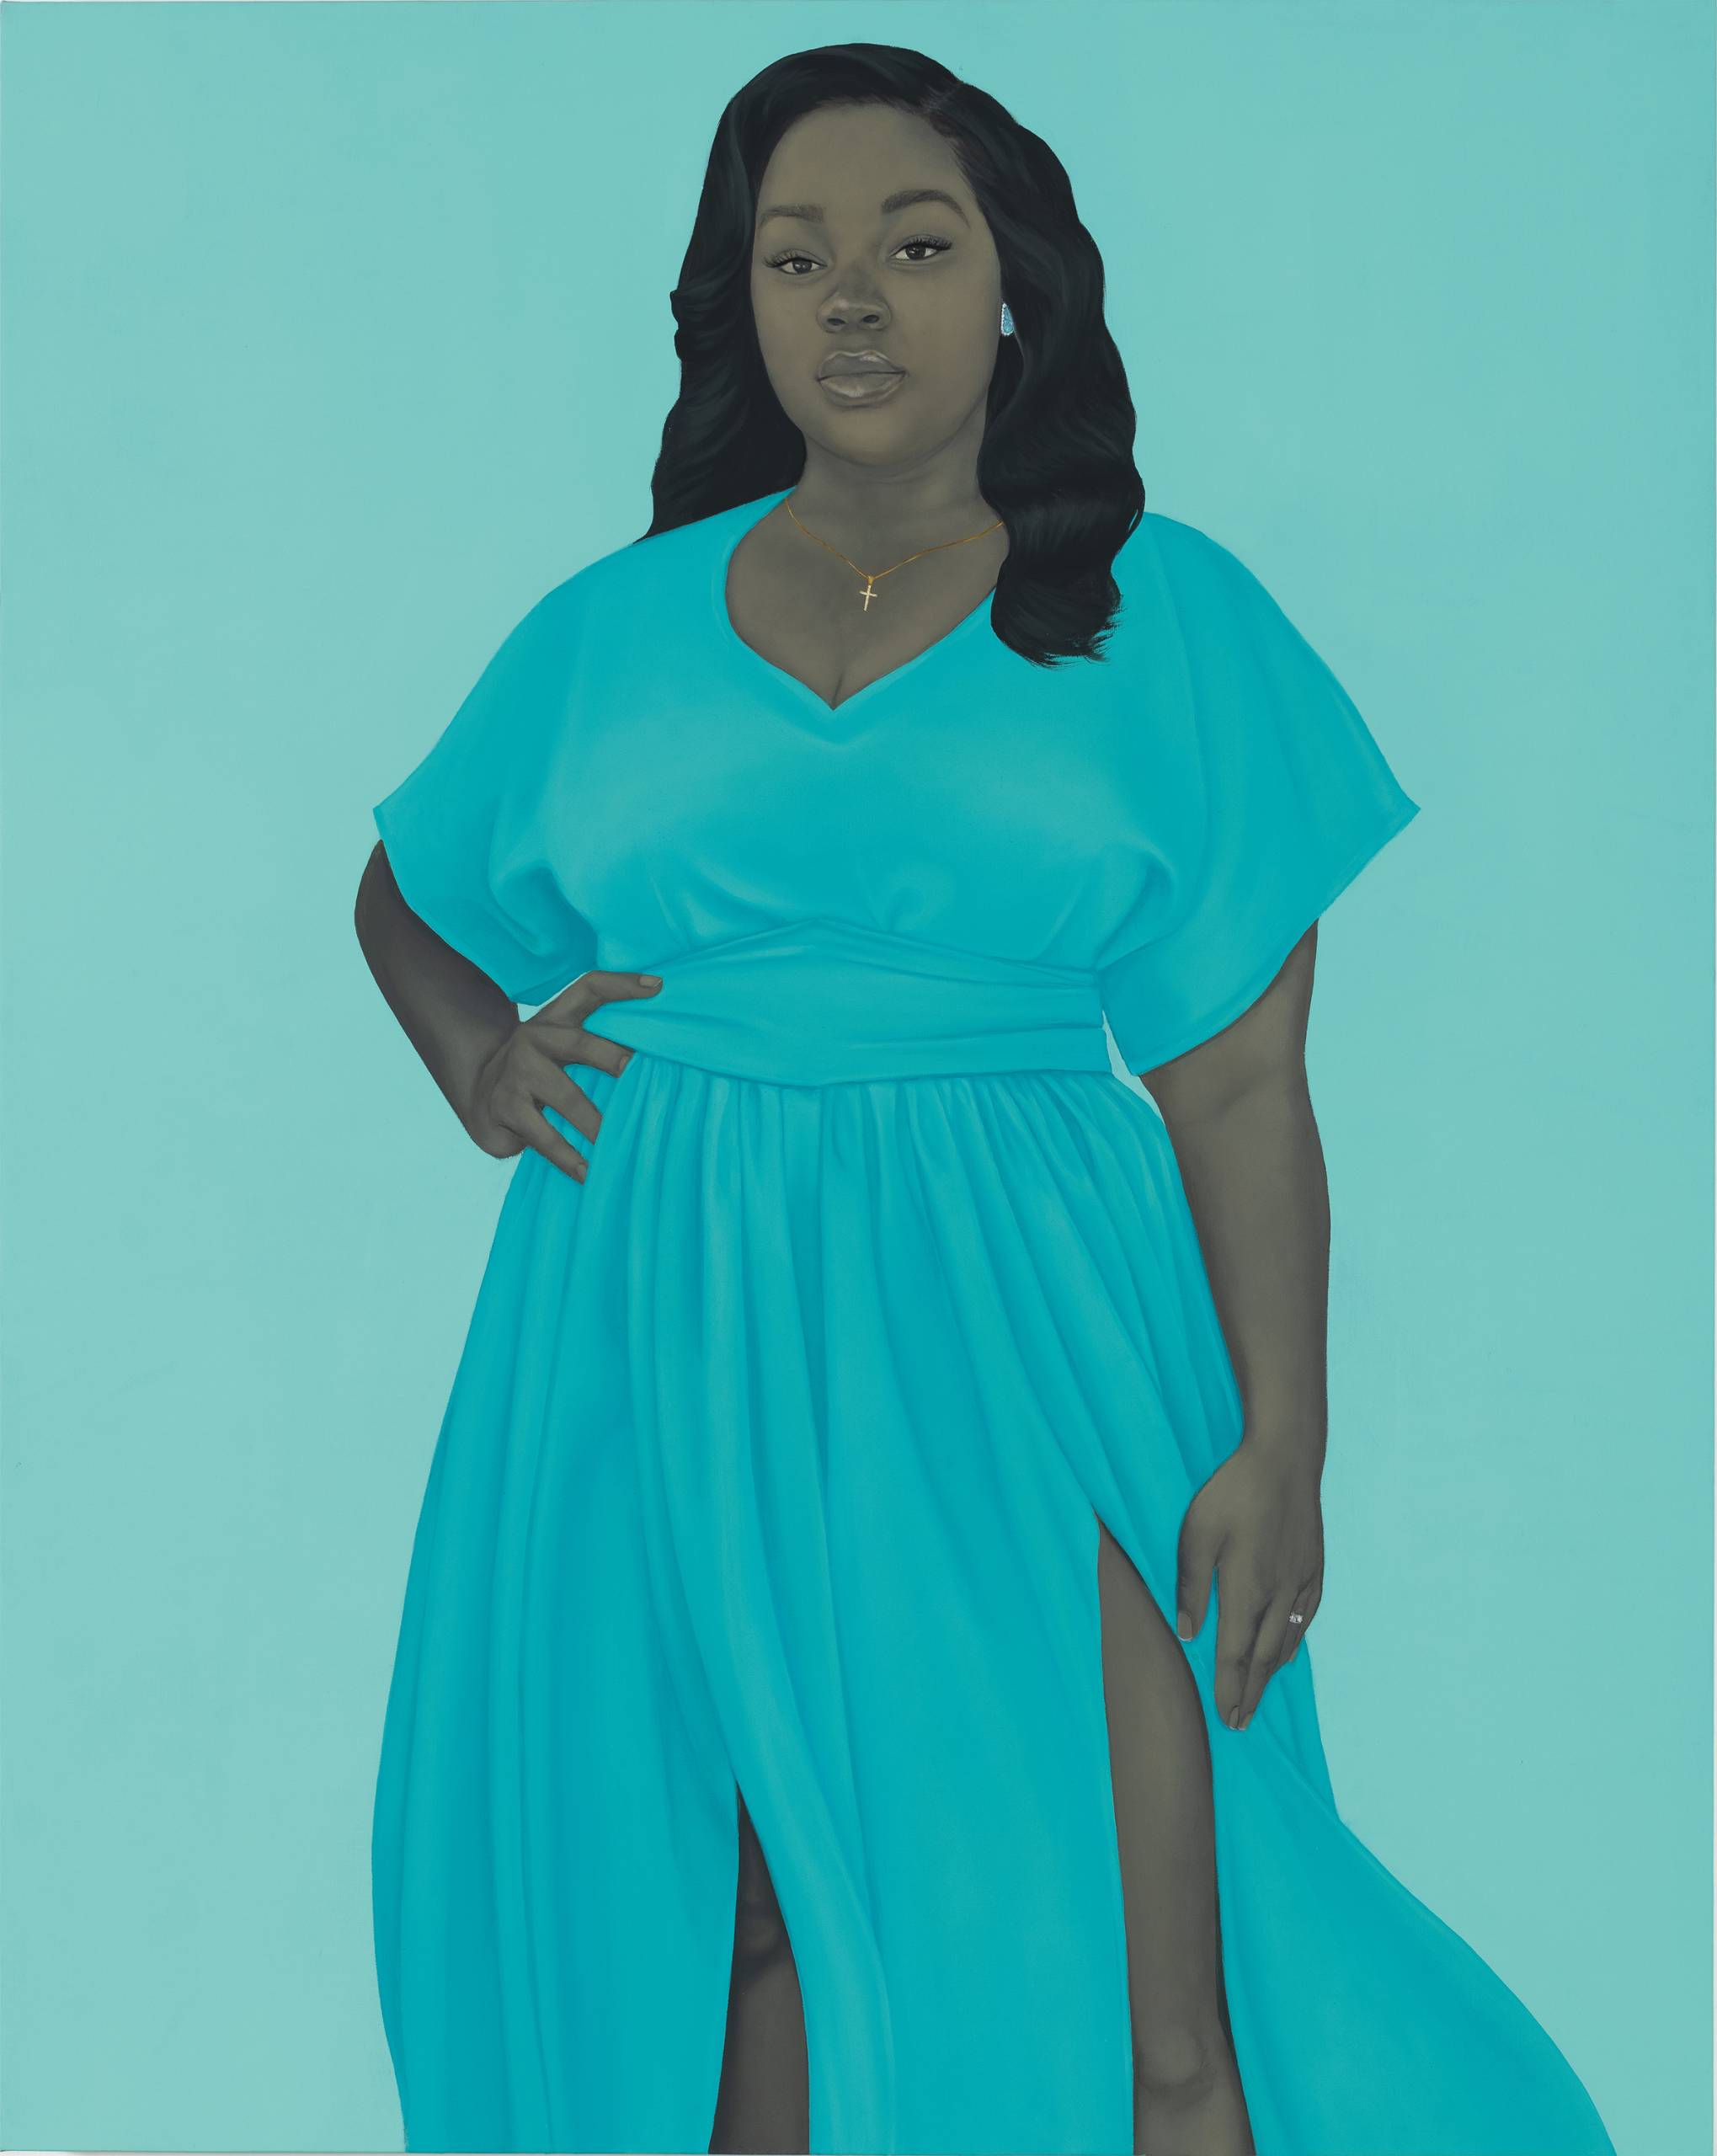 portrait of woman in turquoise dress against turquoise background